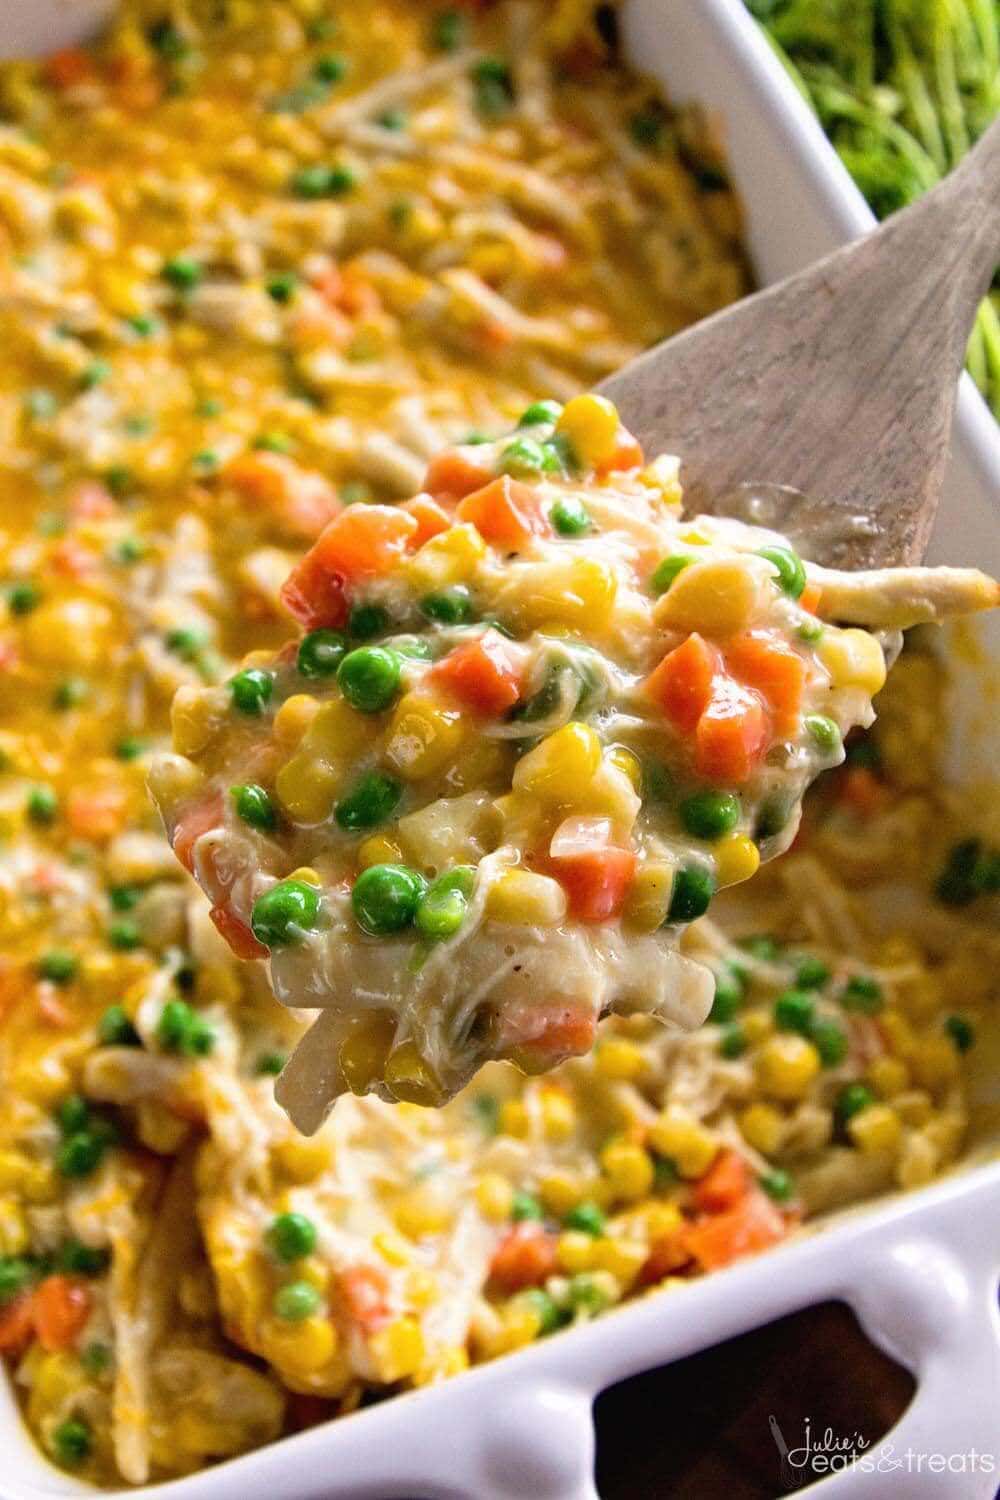 Cheesy Chicken Noodle Casserole ~ Easy, Hearty and Comforting Casserole Loaded with Chicken, Peas, Carrots, Corn and Egg Noodles! This Will Become a Family Favorite Dinner!